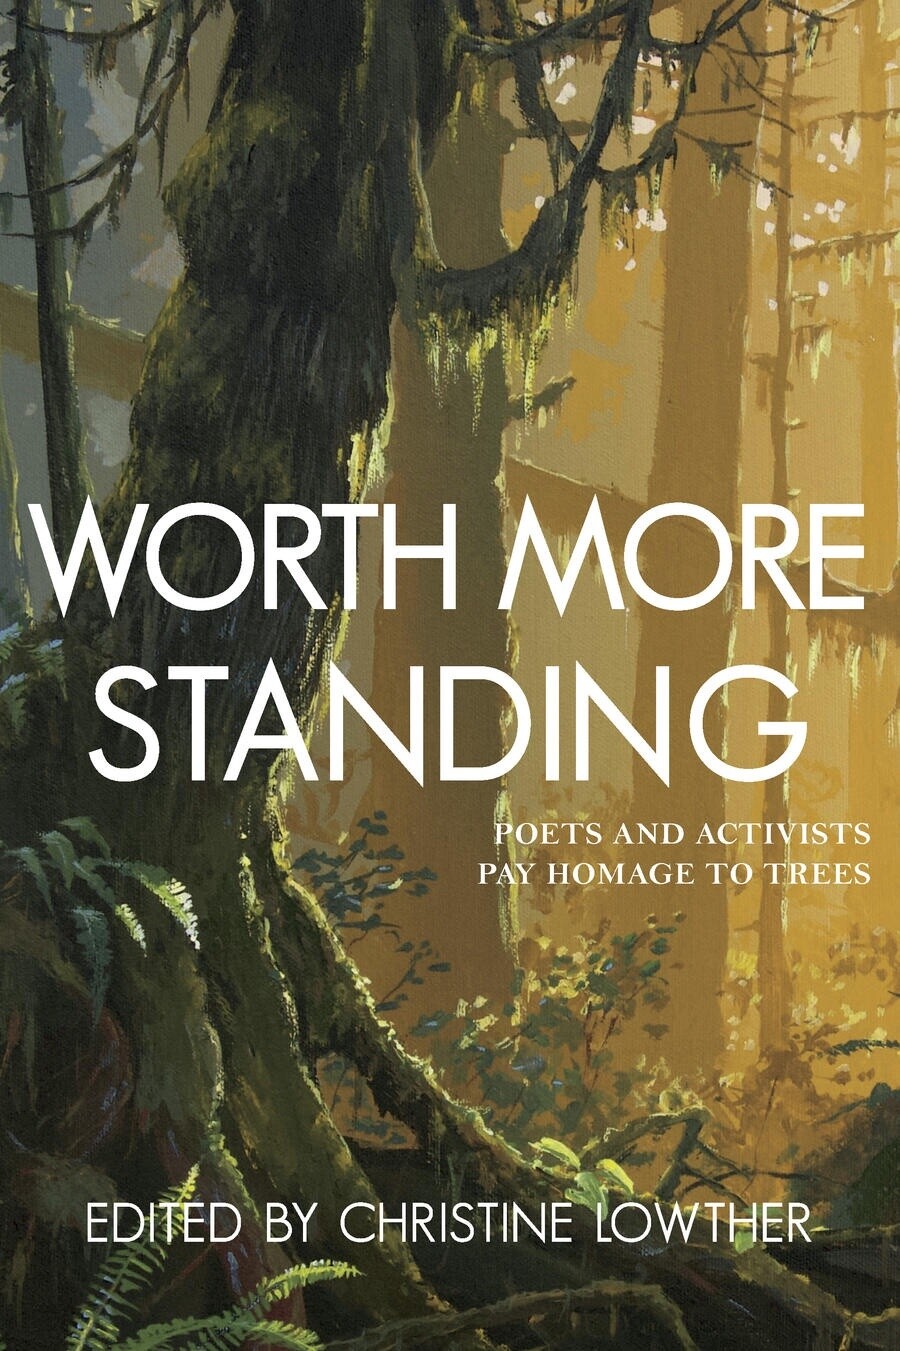 BOOK WORTH MORE STANDING